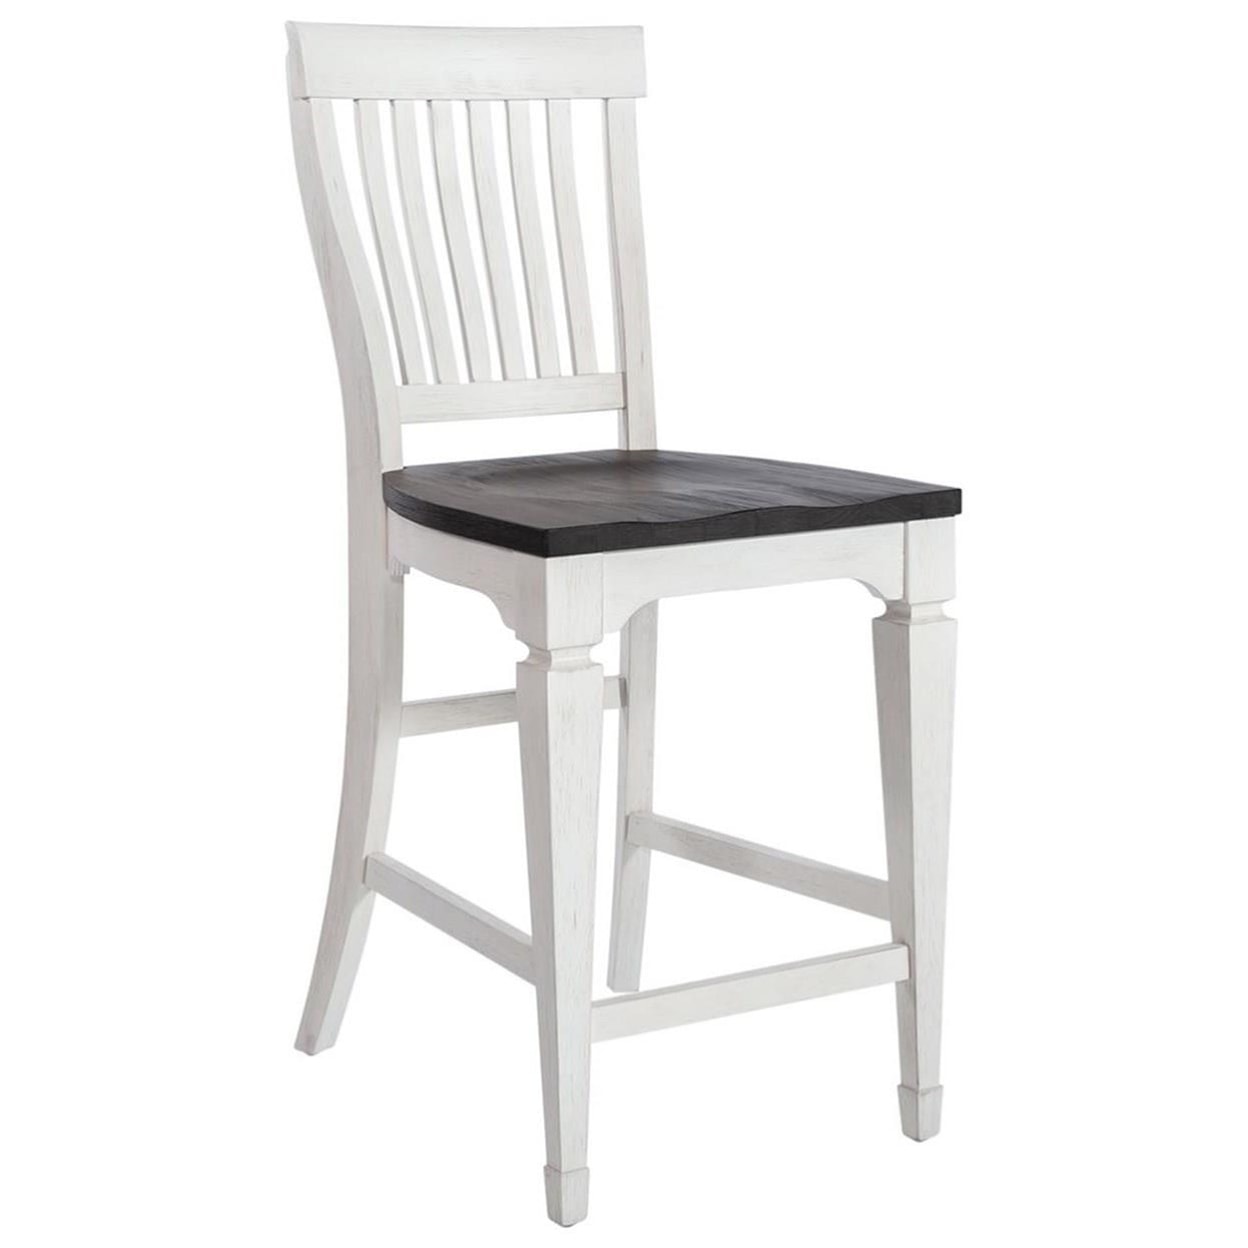 Freedom Furniture Allyson Park Counter Height Slat Back Chair